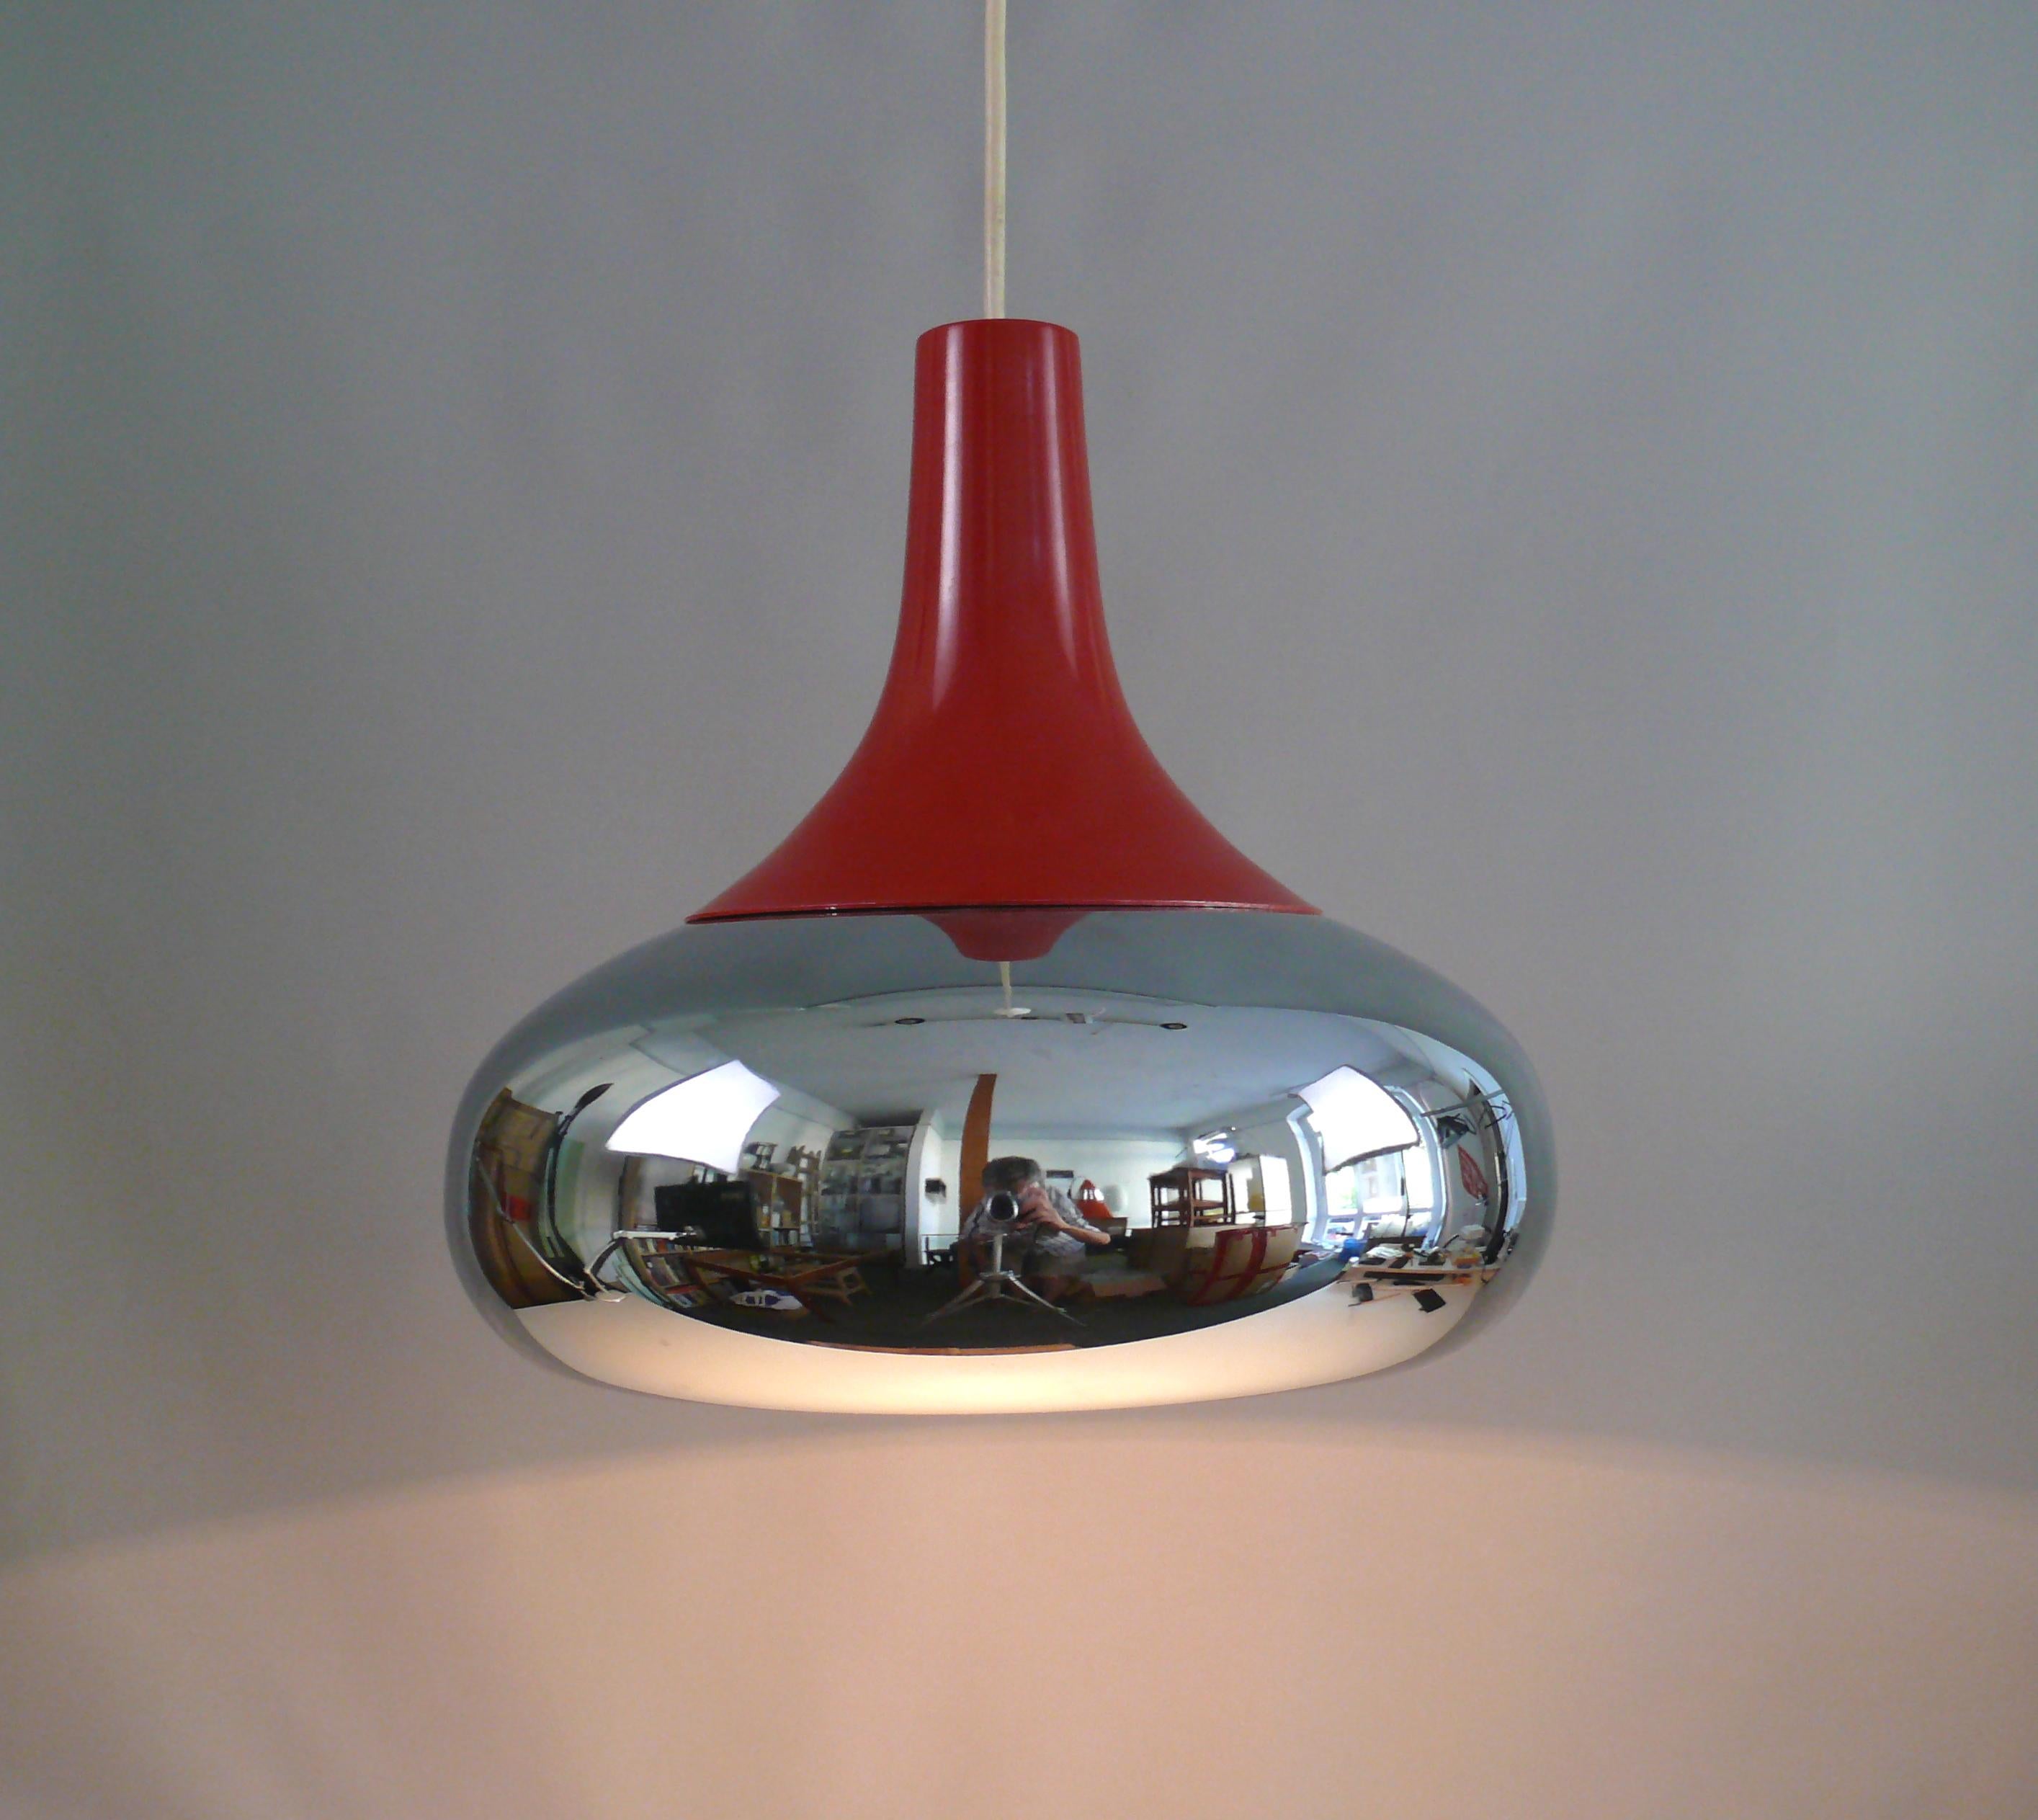 1960s chrome pendant light with red painted metal cover, no label left.

Space age design: The lamp has a typical 1960s design with a UFO-shaped, chrome-plated shade. The shade is coated in white on the inside. The light only shines downwards. The